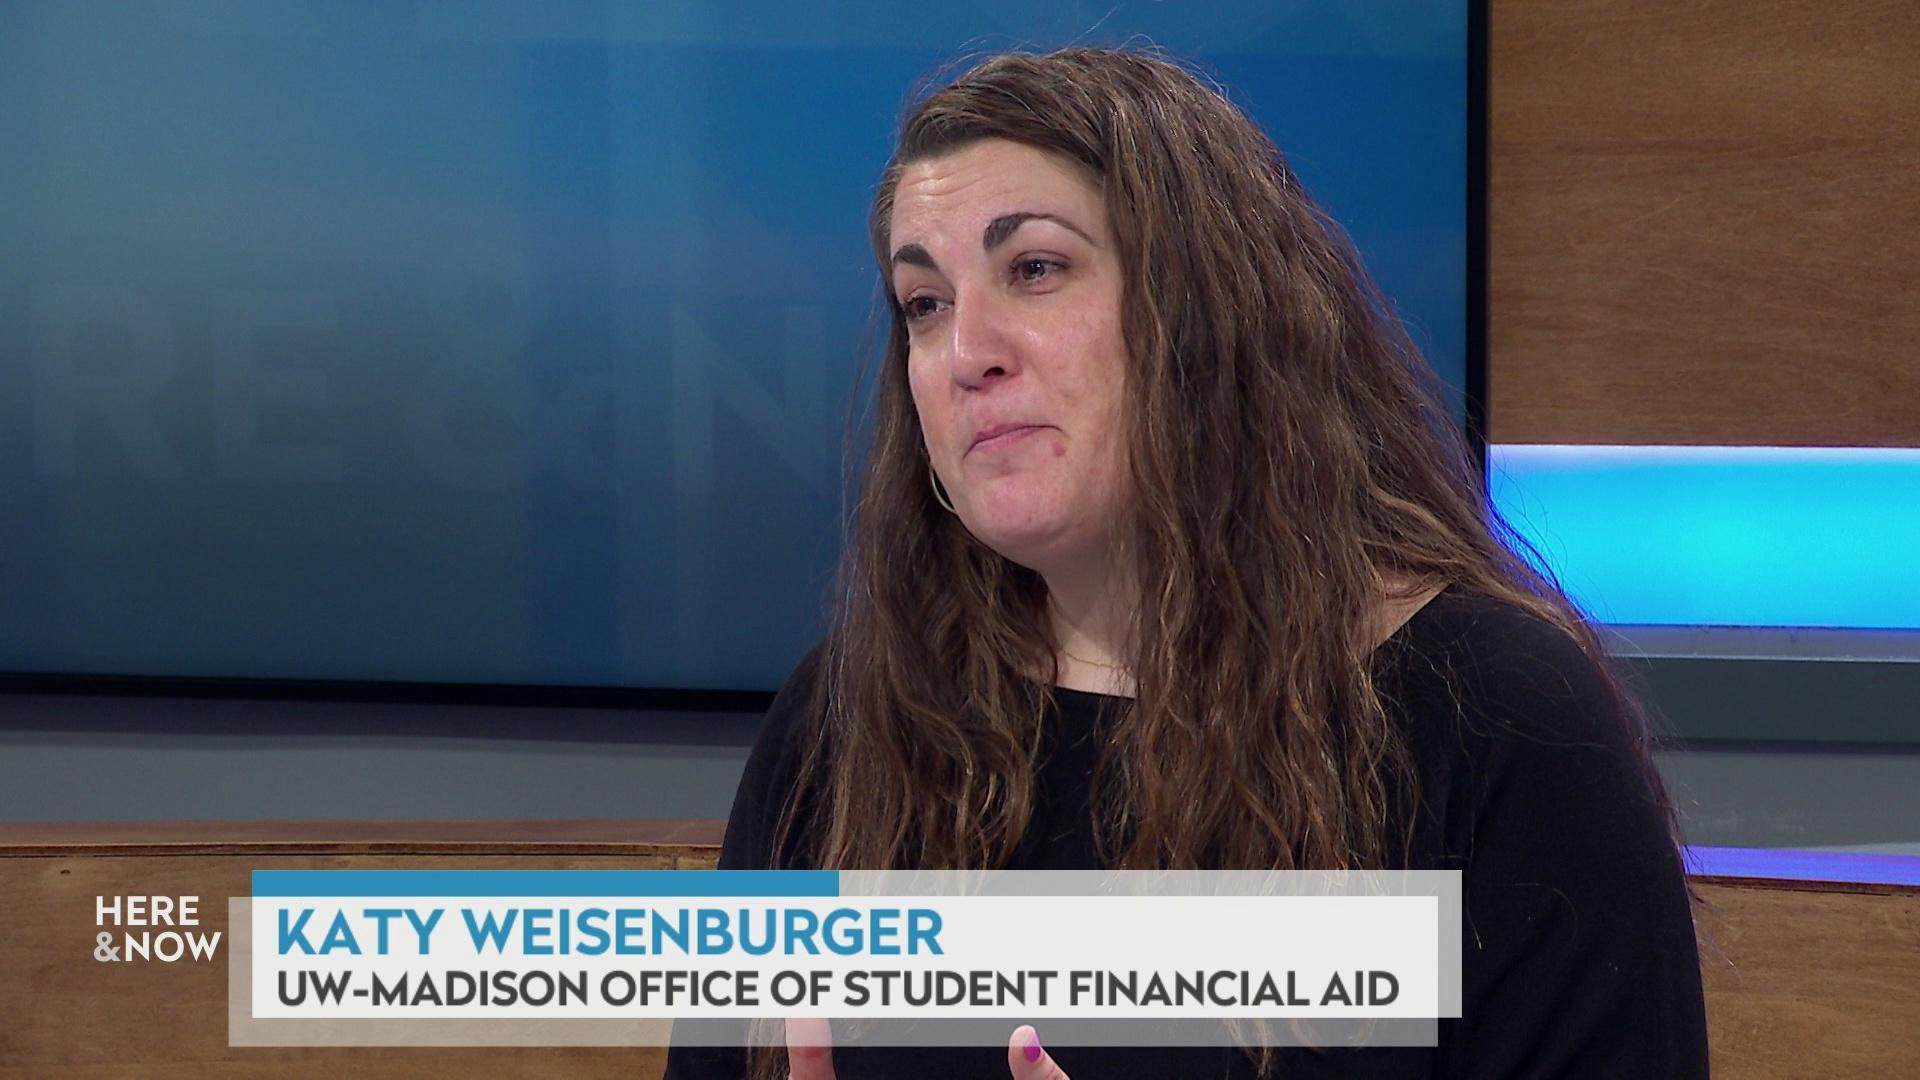 Katy Weisenburger on major delays in student financial aid